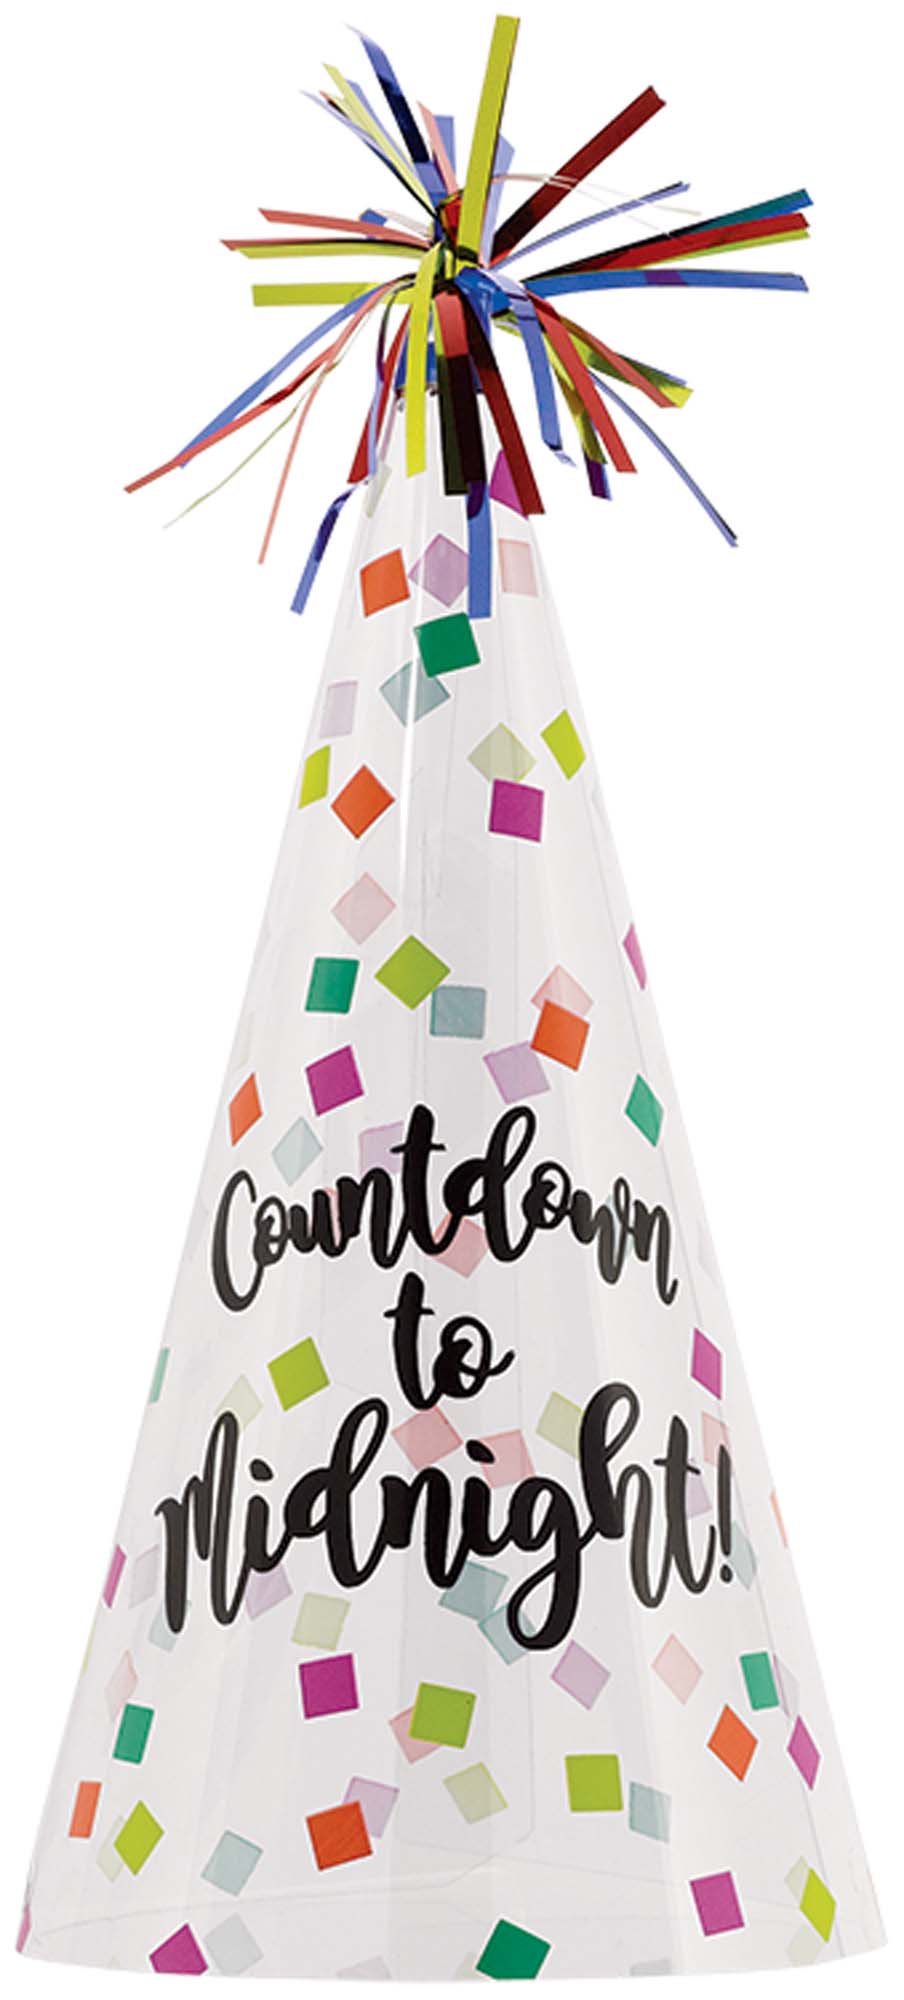 Colorful Countdown to Midnight New Year's Party Hat